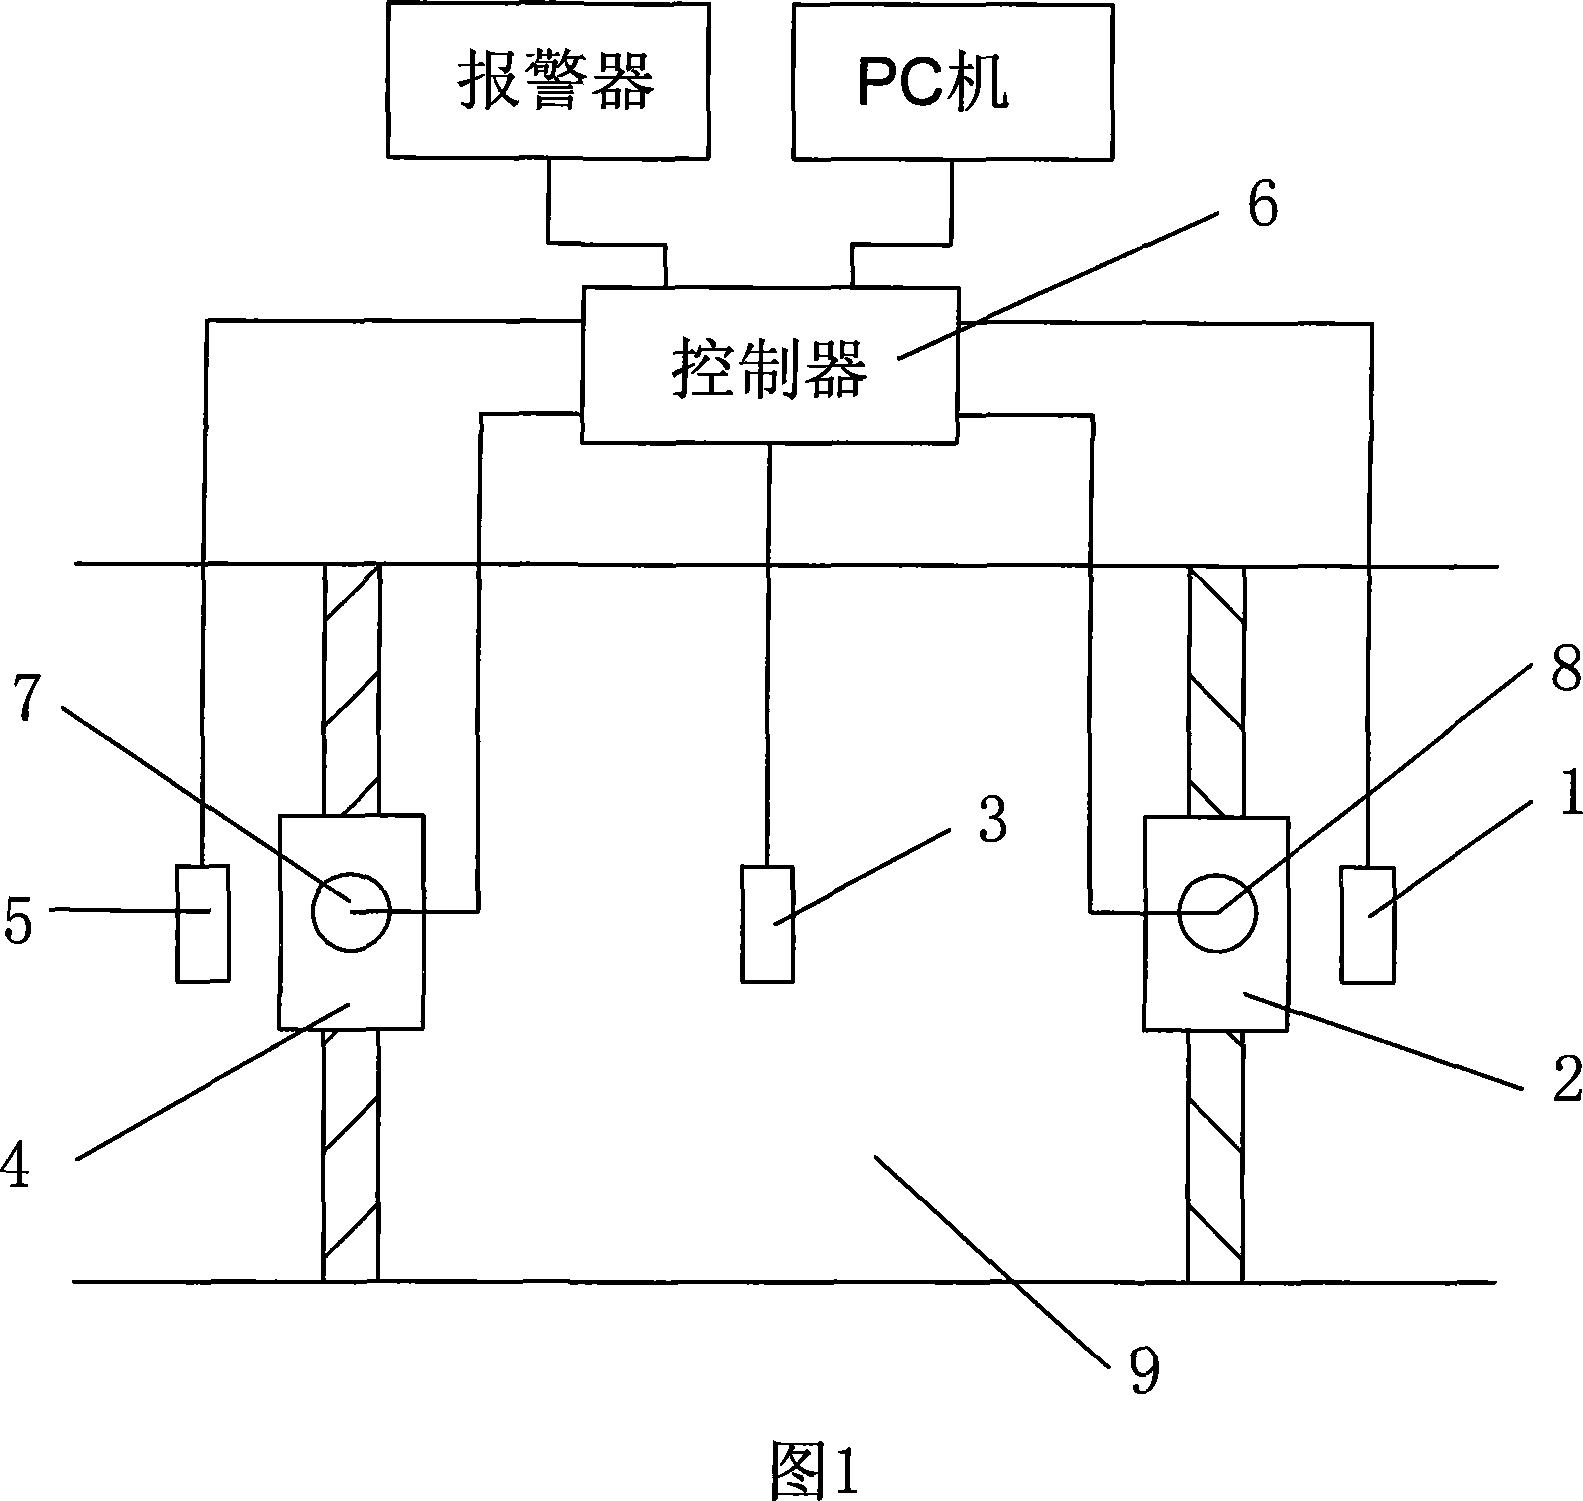 Secondary door access system adopting biological character identification technology and control method